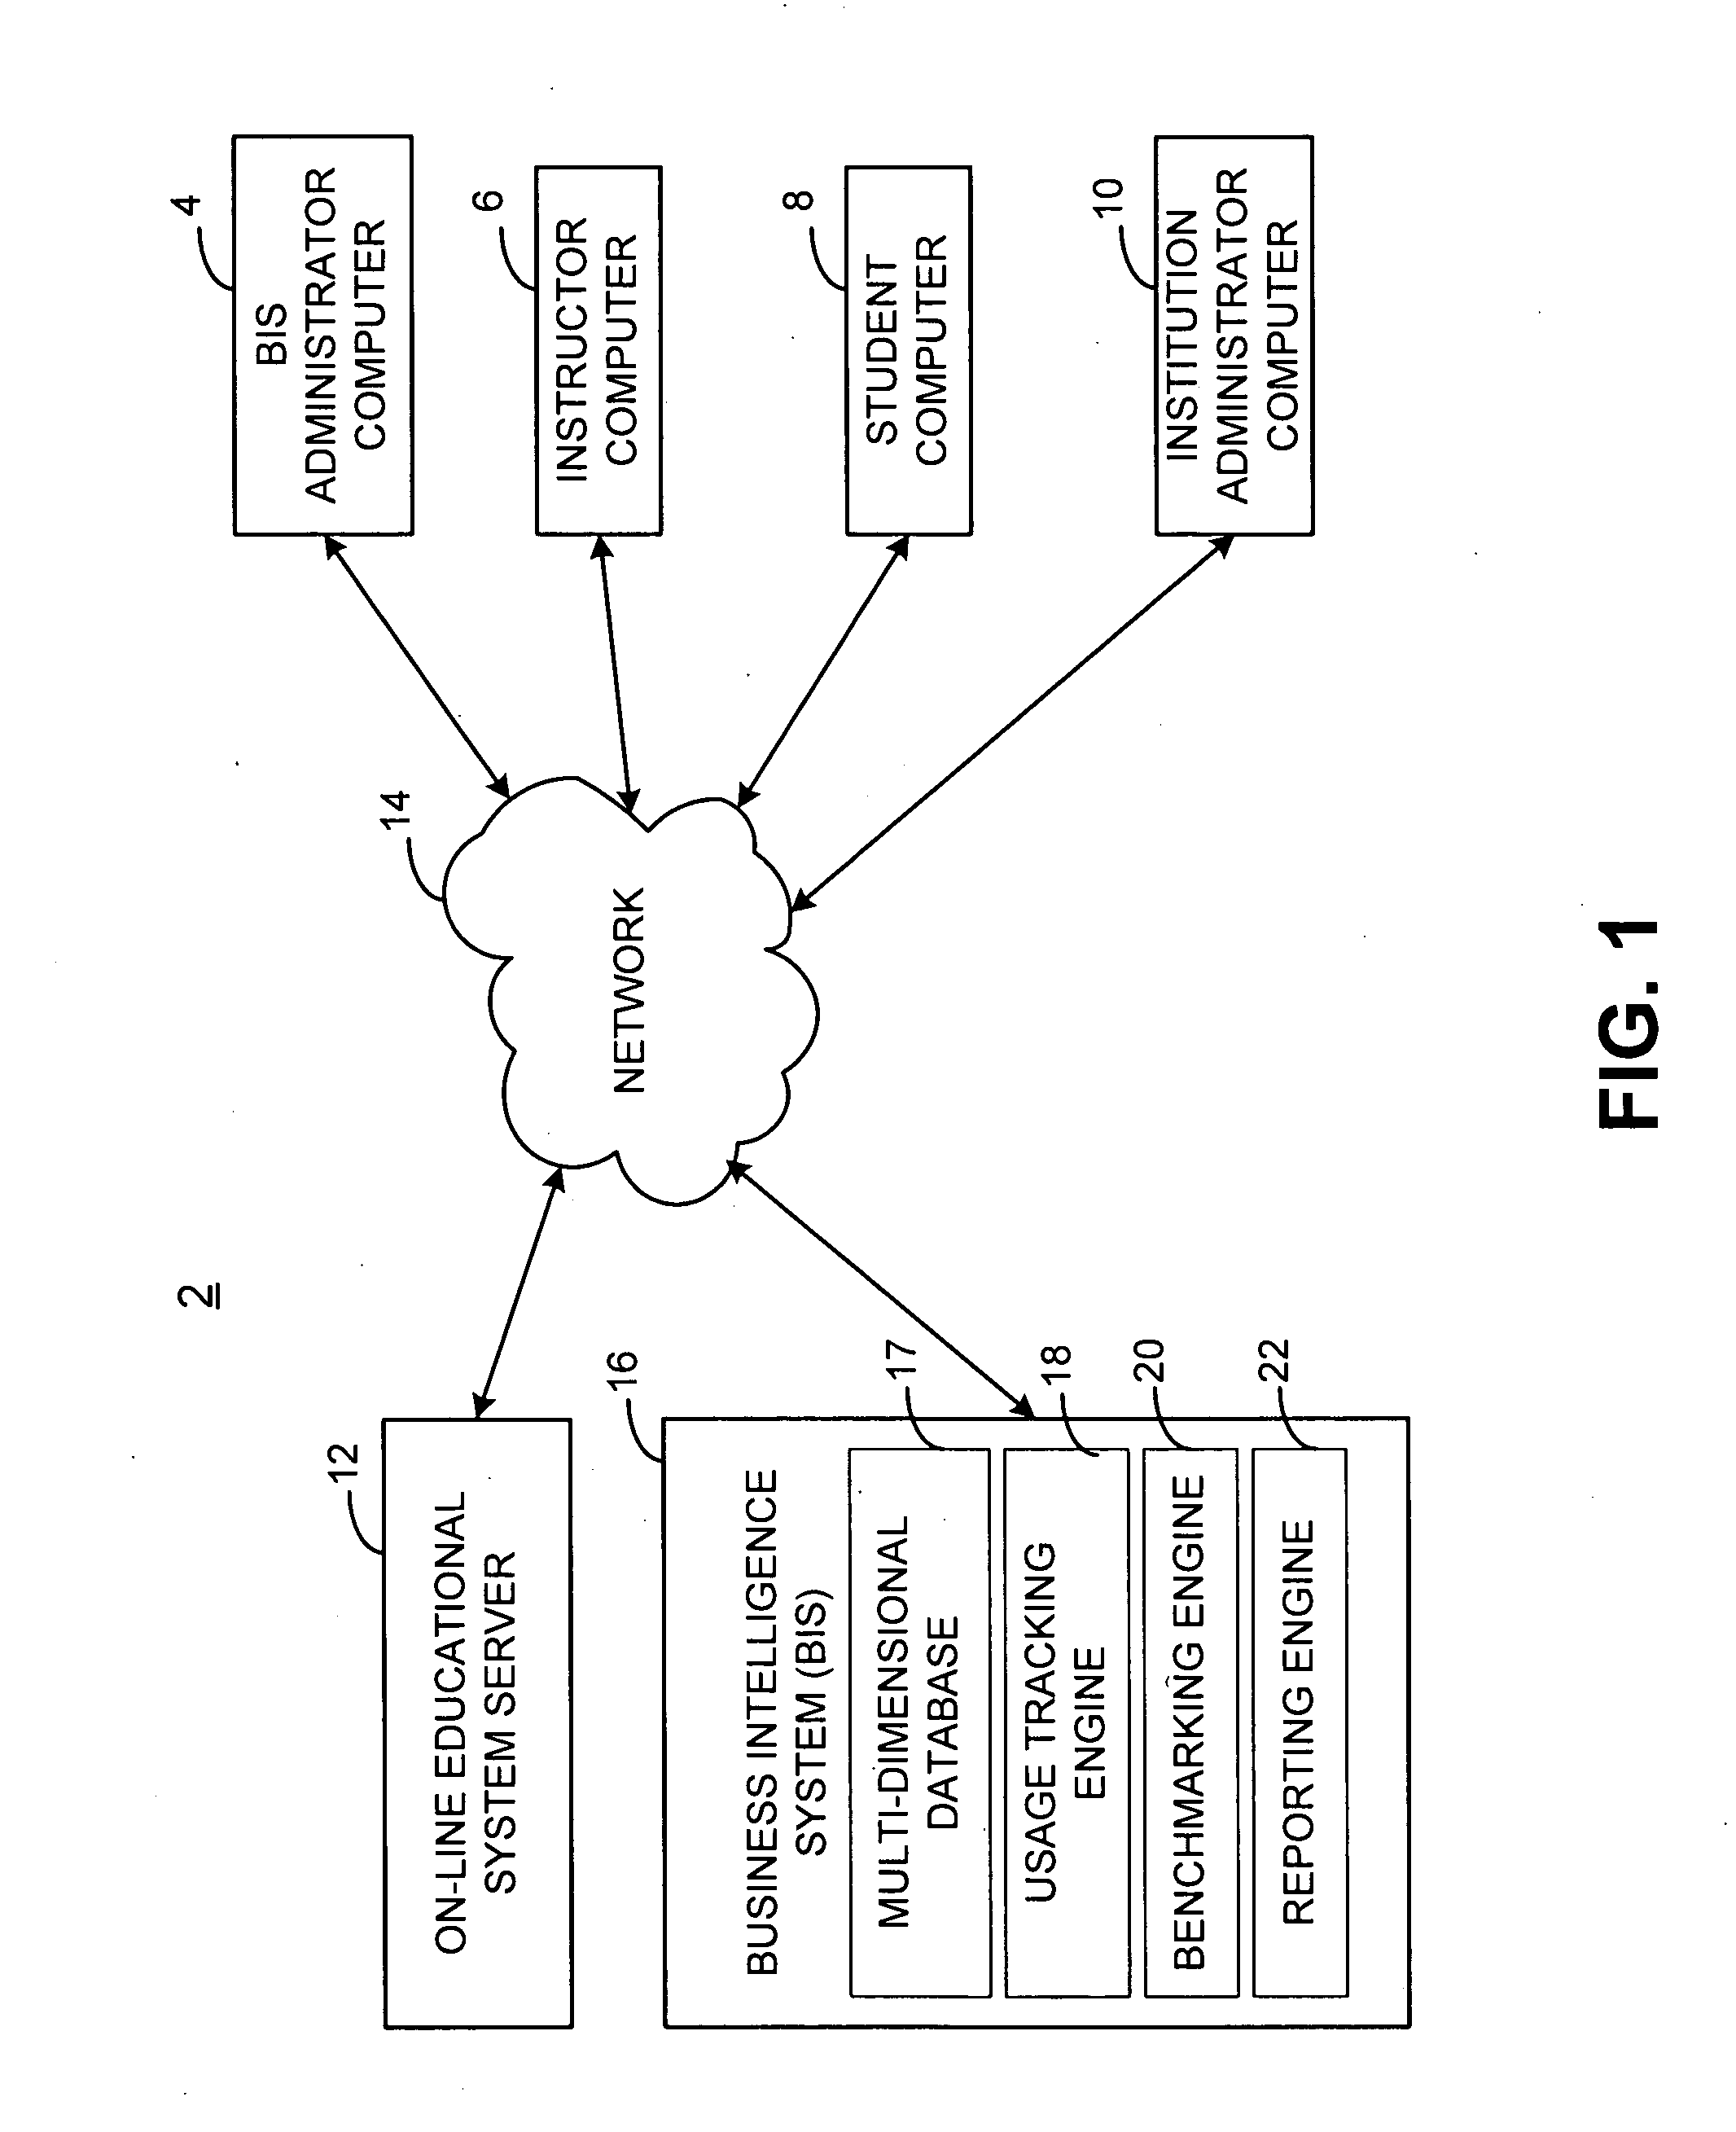 Business intelligence data repository and data management system and method